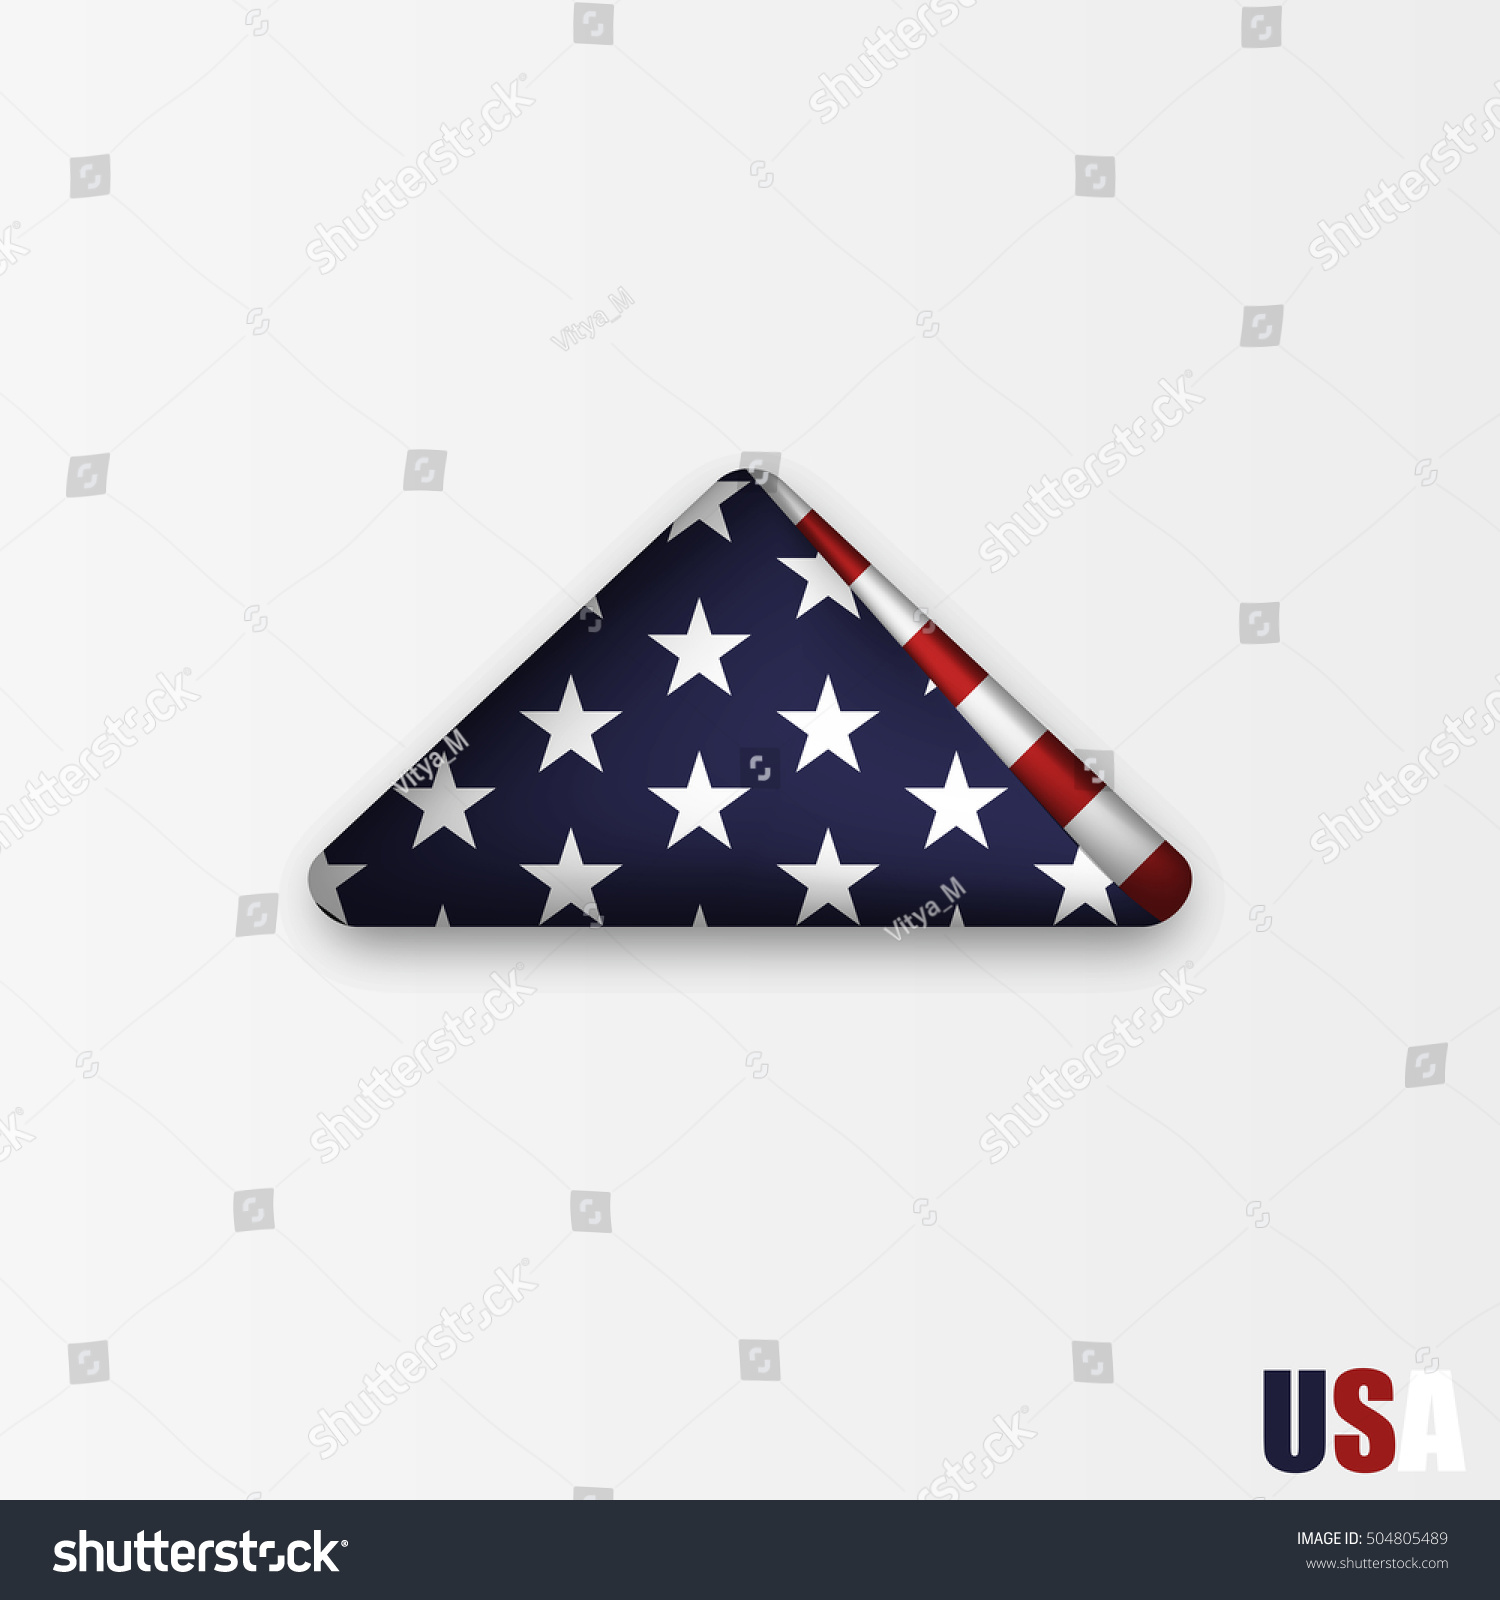 why do we fold the american flag in a triangle